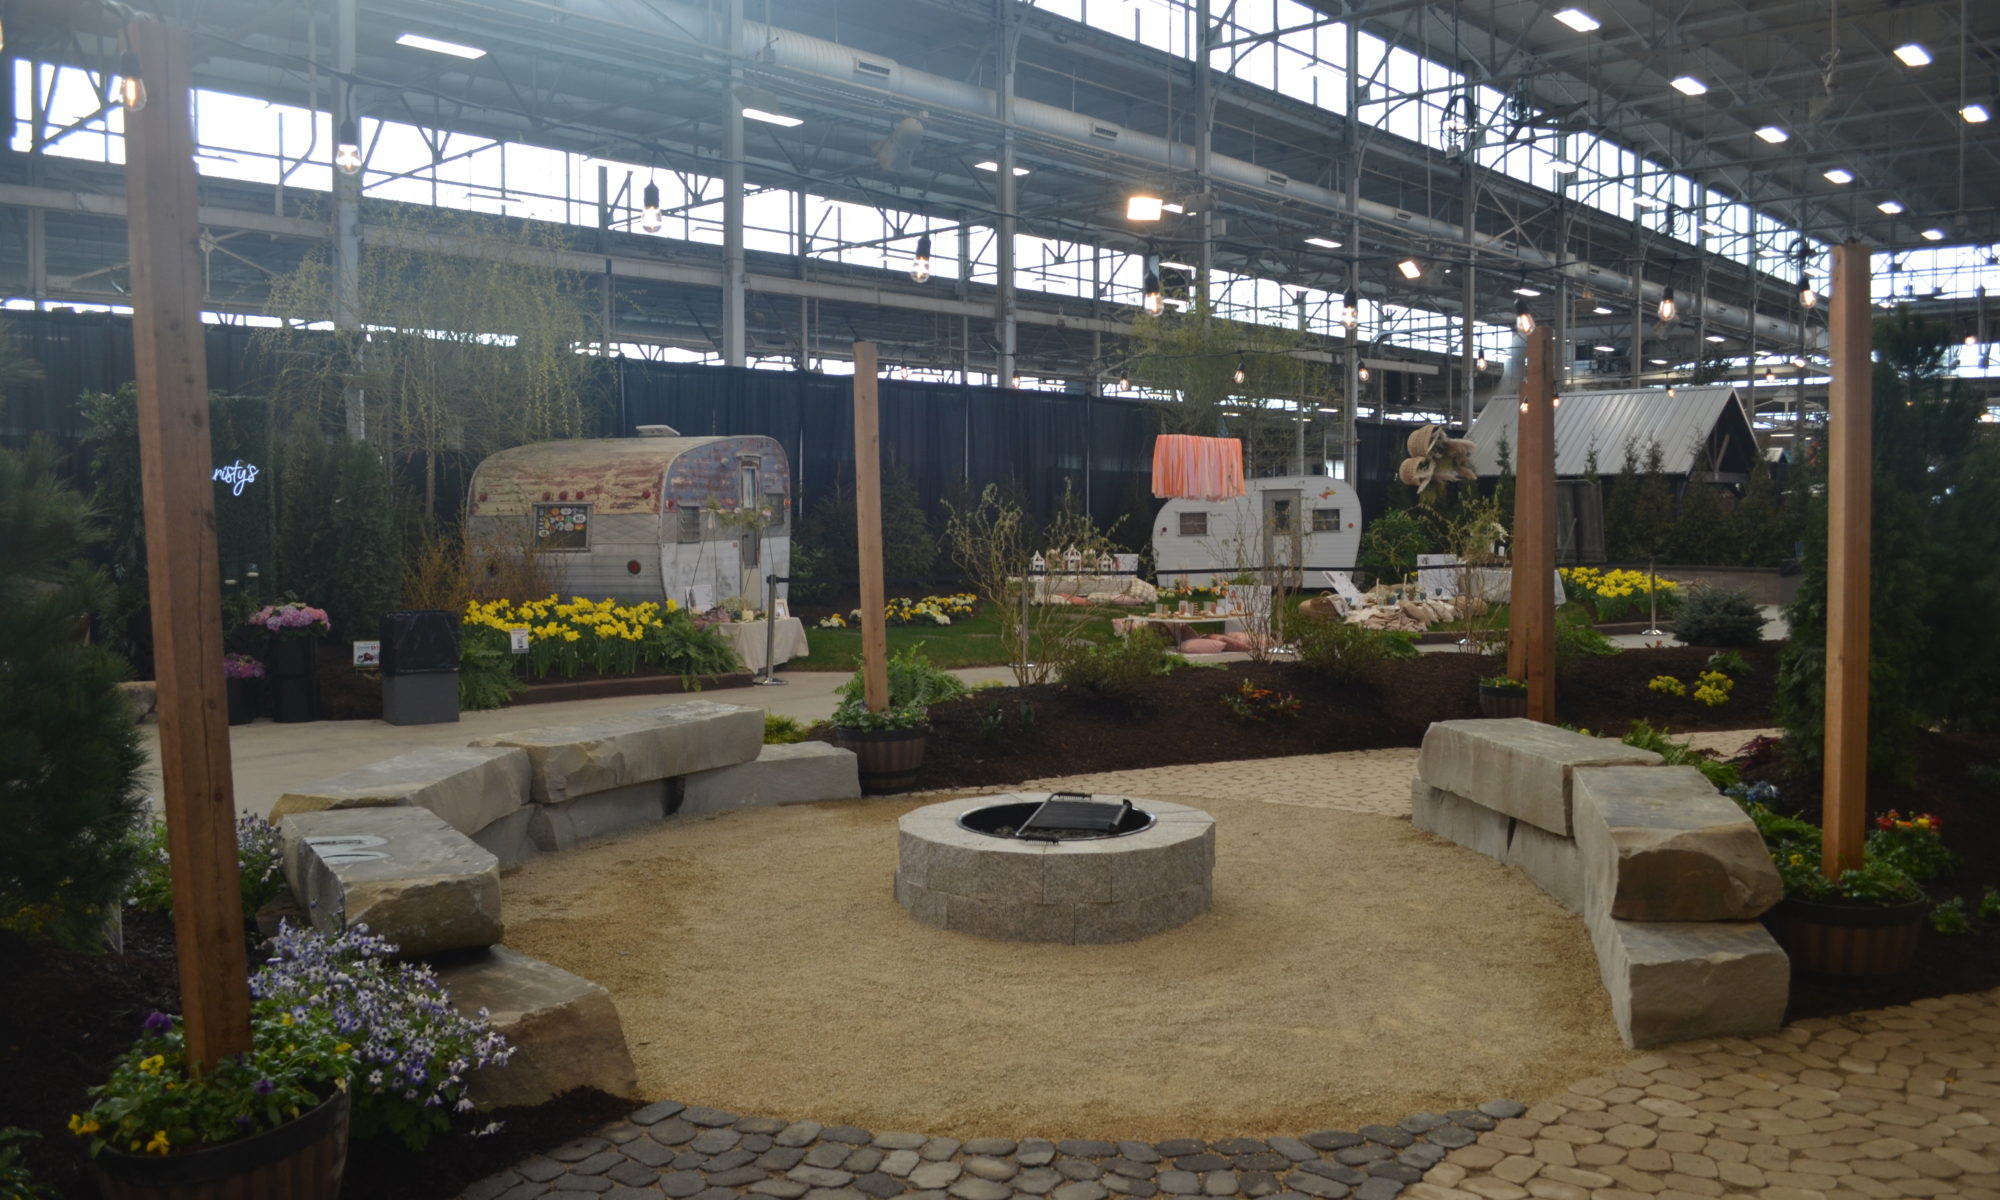 indiana indianapolis flower and patio show 2022 pergola fire pit swing swings lighting landscaping custom bubbling boulder water feature fire pit modern pergola outdoor grill island arbors custom swings landscaping precision outdoors